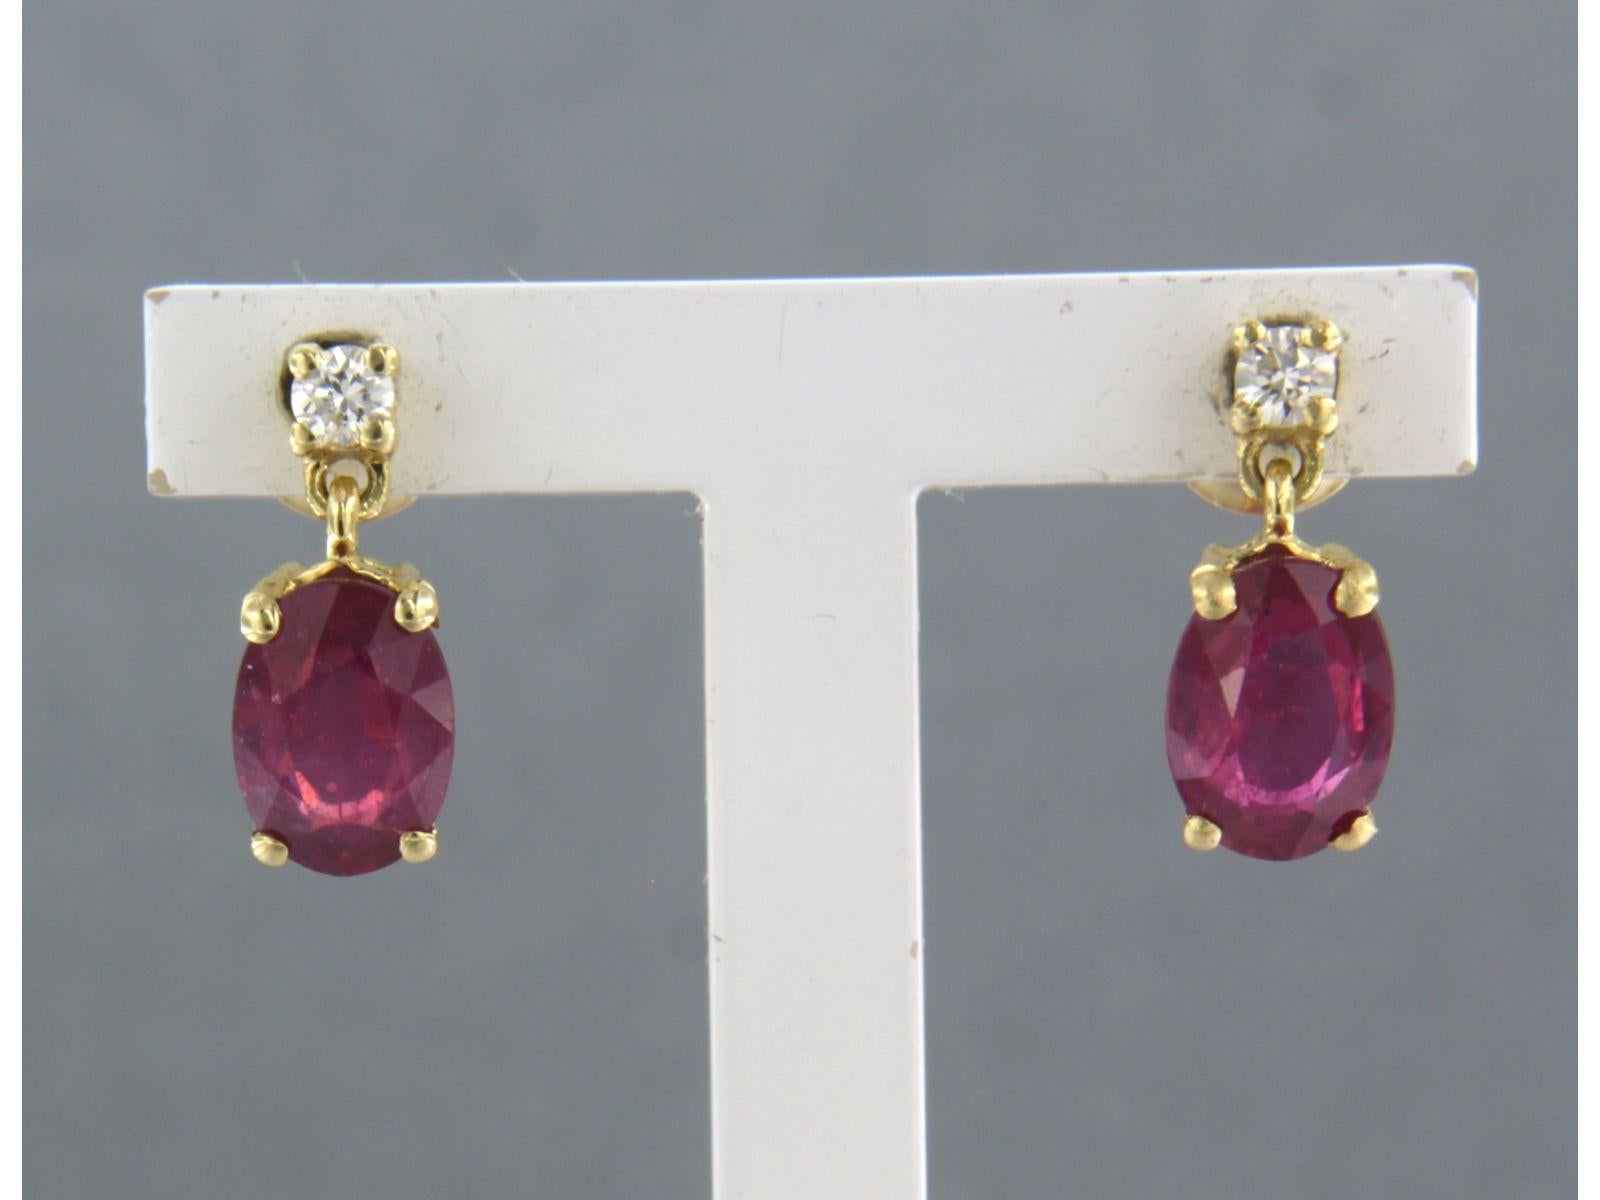 18k yellow gold earrings set with ruby ​​to. 2.26ct and brilliant cut diamond up to. 0.10ct - F/G - VS/SI

detailed description:

The earrings are 1.2 cm high and 5.2 mm wide

weight: 2.2 grams

occupied with :

- 2 x 7.0 mm x 5.0 mm oval facet cut